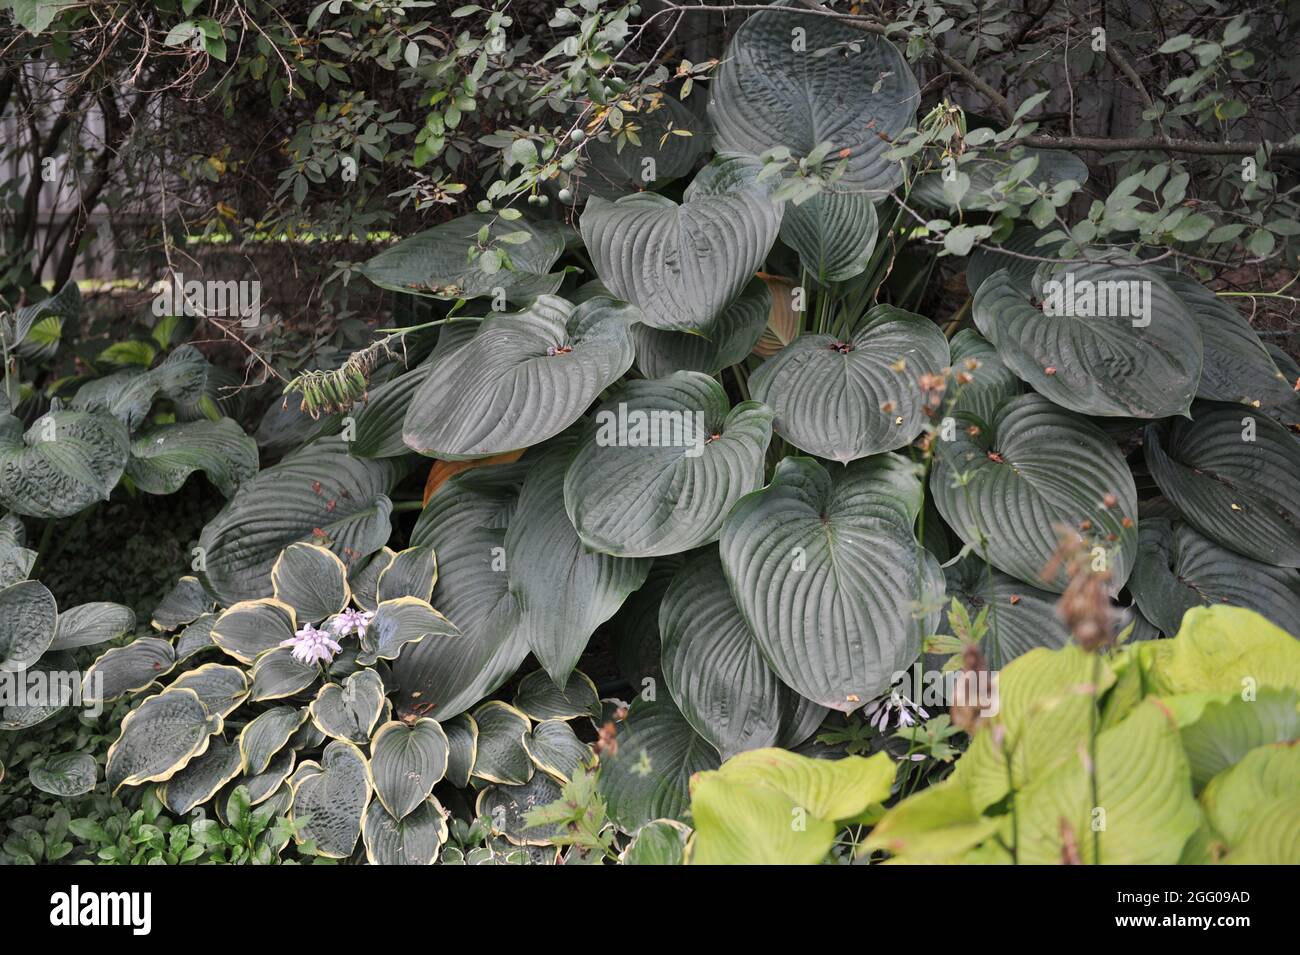 Giant Hosta Empress Wu with large grey-green leaves grows in a garden in August Stock Photo